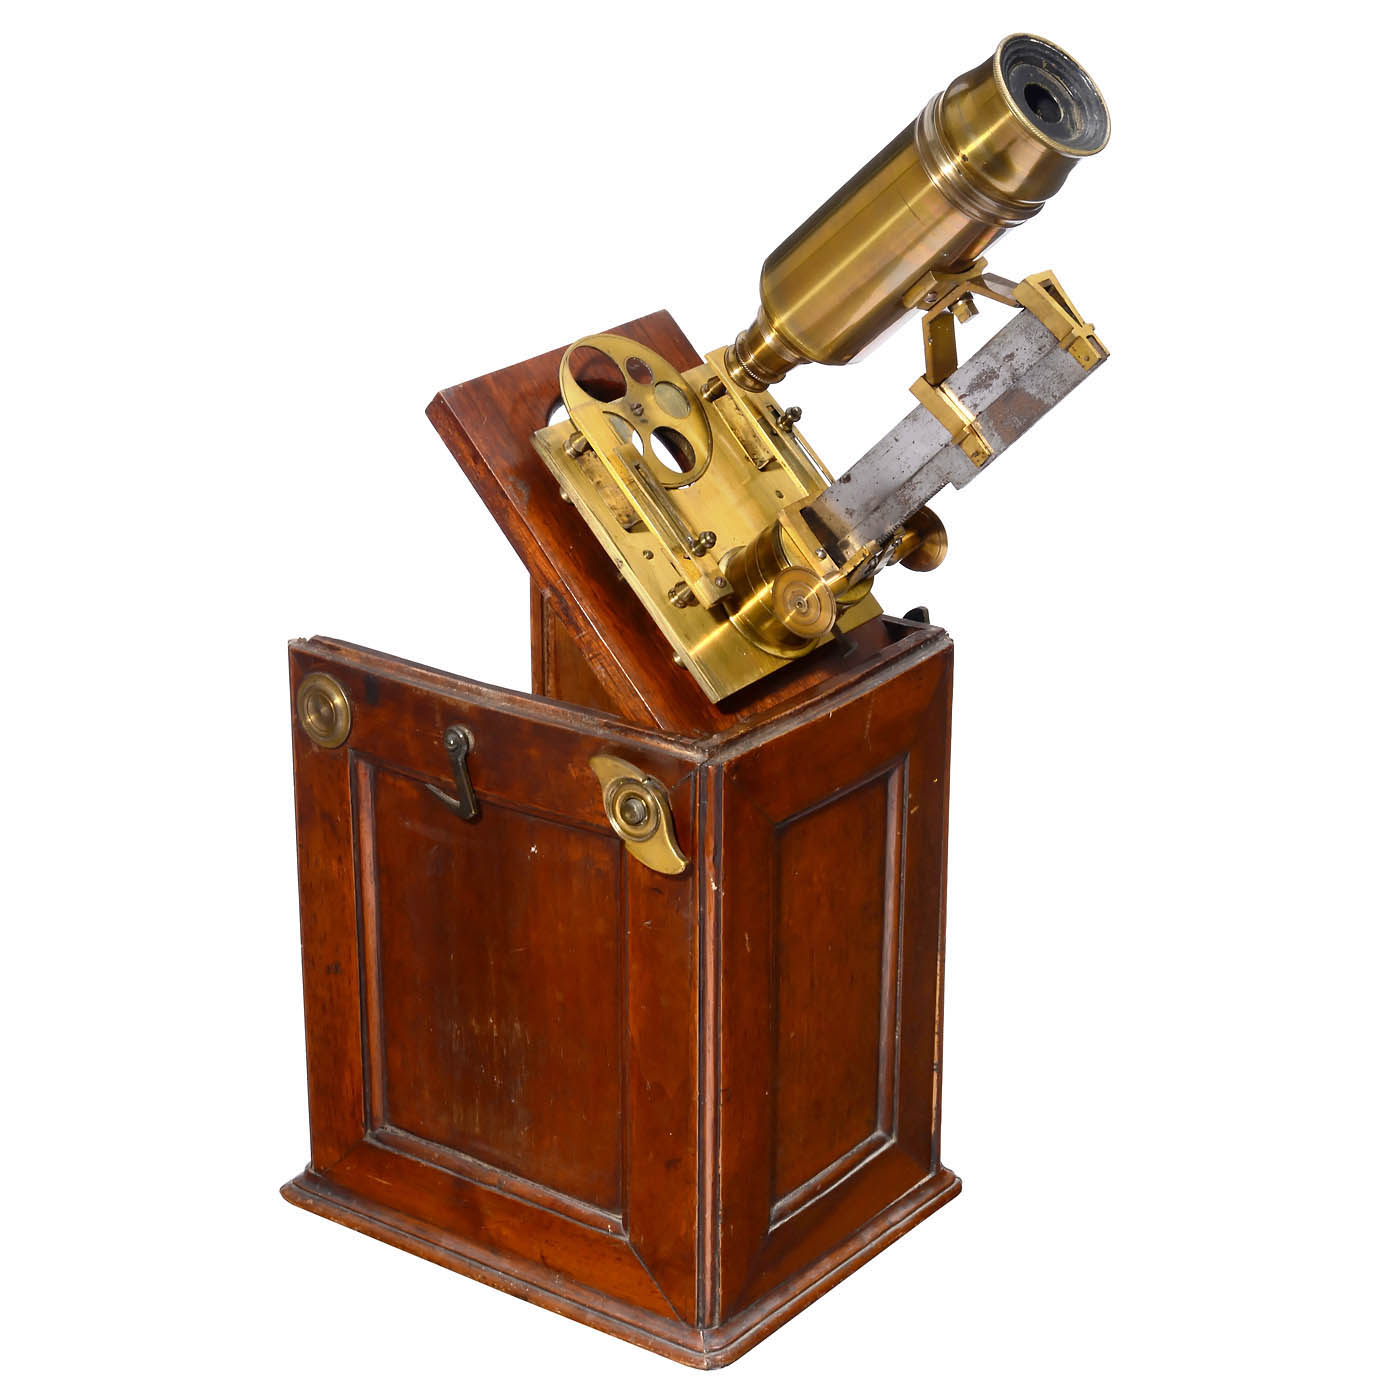 French Box Microscope, c. 1760 - Image 8 of 9